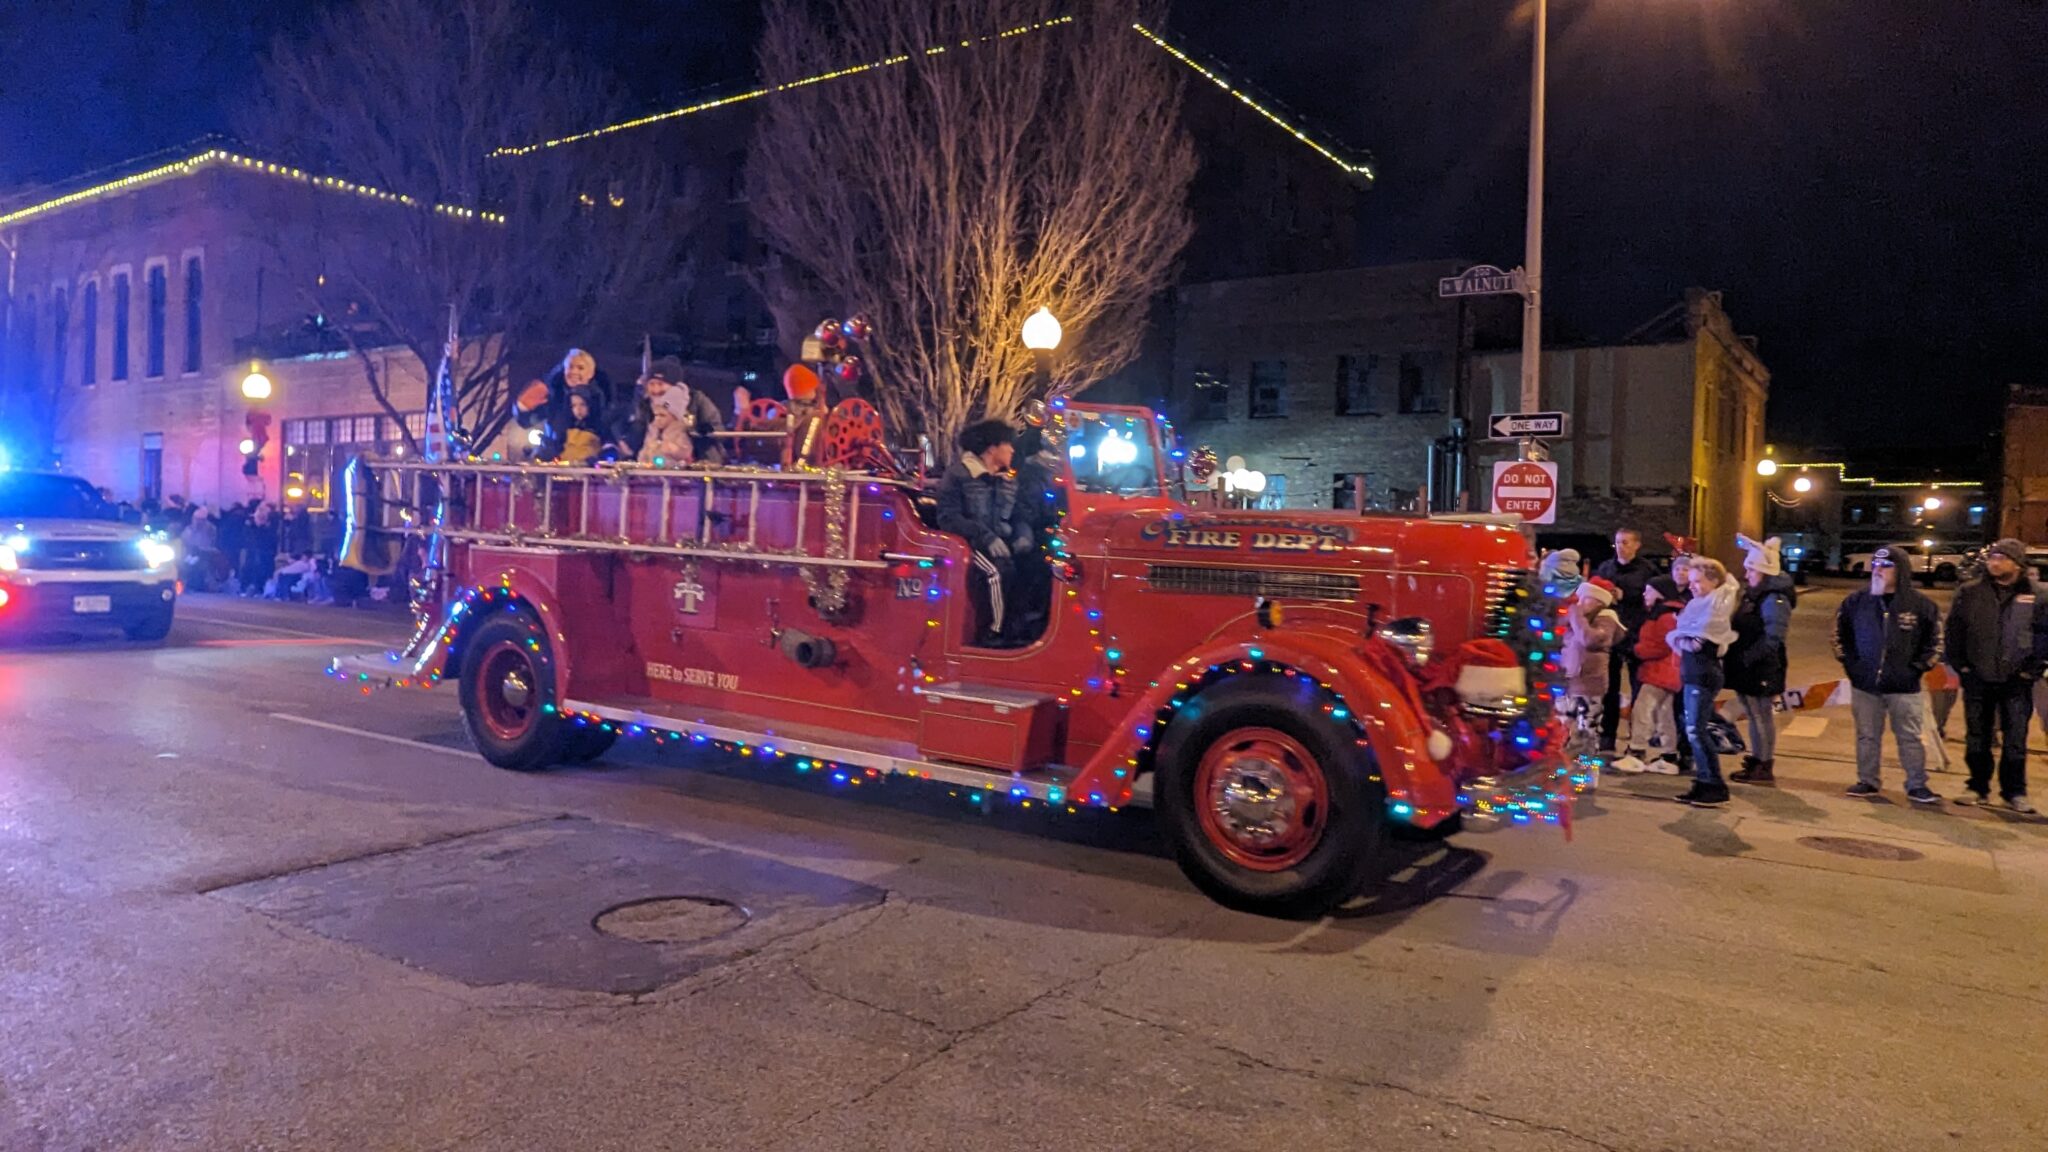 Annual Parade of Lights Illuminates Downtown Champaign City of Champaign